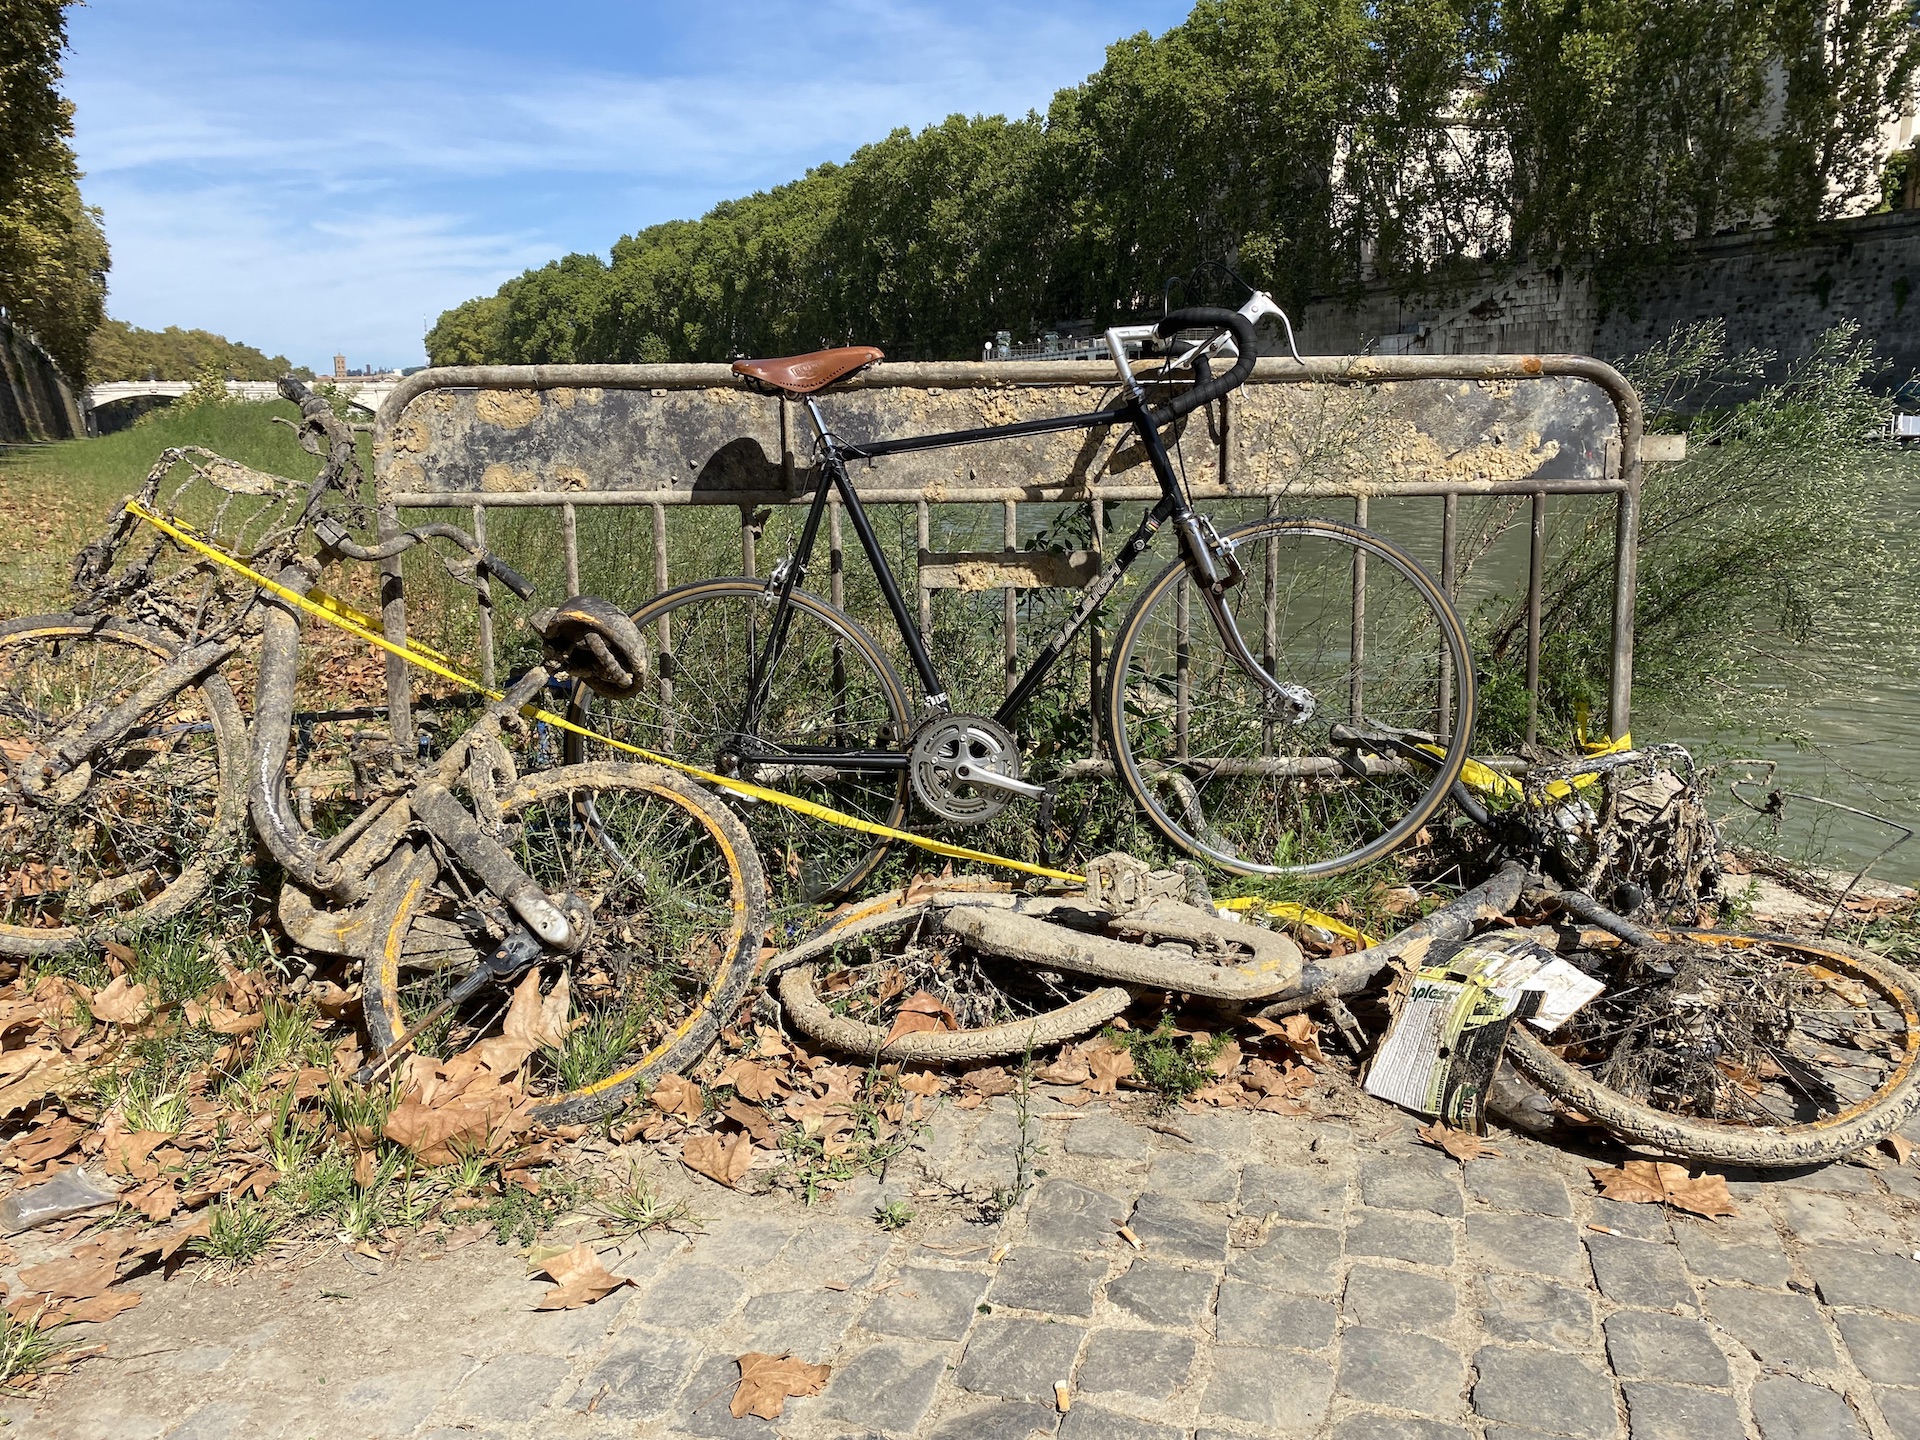 My bicycle leaning against a muddy railing with the river in the background. Below my bicycle are the mud-encrusted ruins of two bicycles presumably dredged from the river.